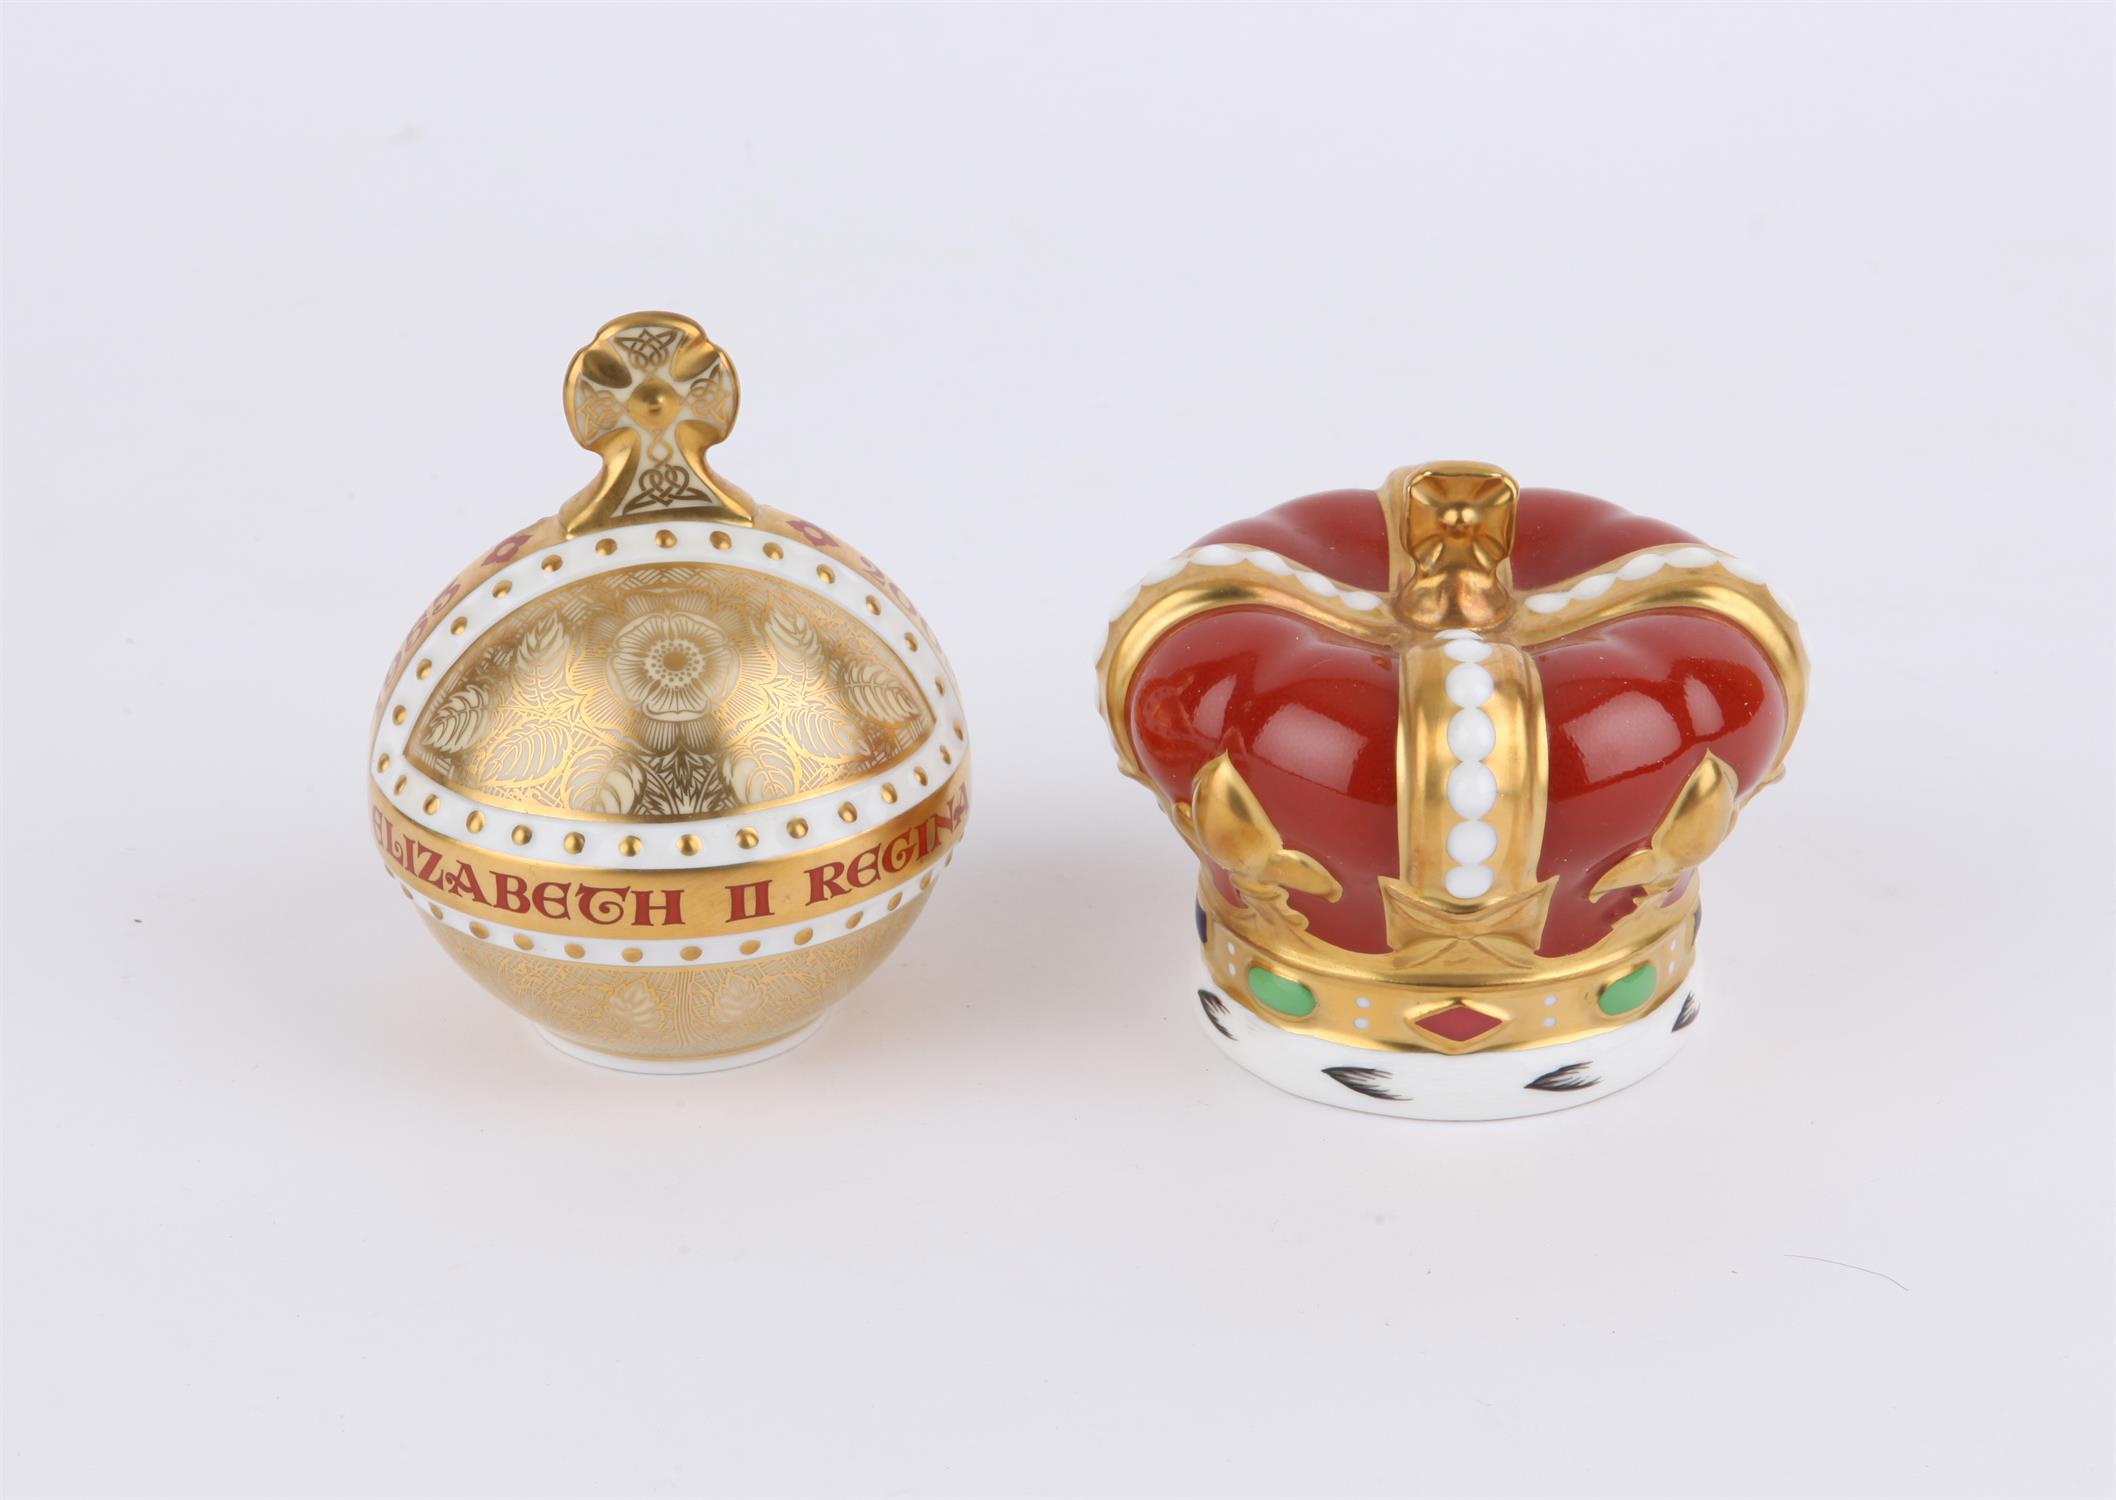 Royal Crown Derby Coronation Orb porcelain paperweight, commissioned by Goviers of Sidmouth to